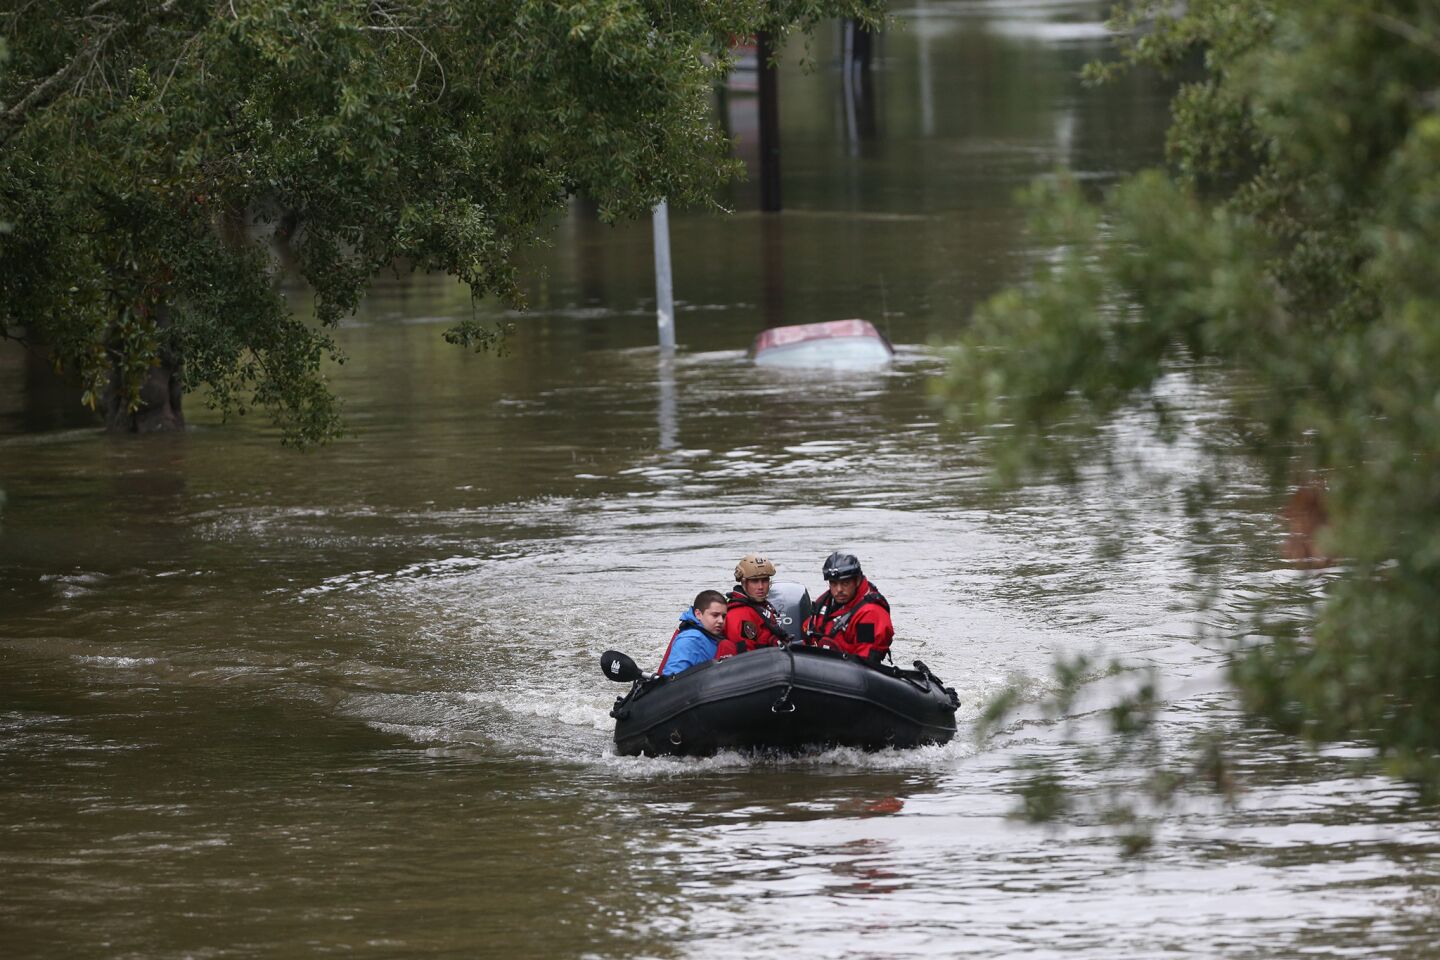 Daniel Gross, 15, is rescued by Houston police after he was stranded on top of his car in southwest Houston.